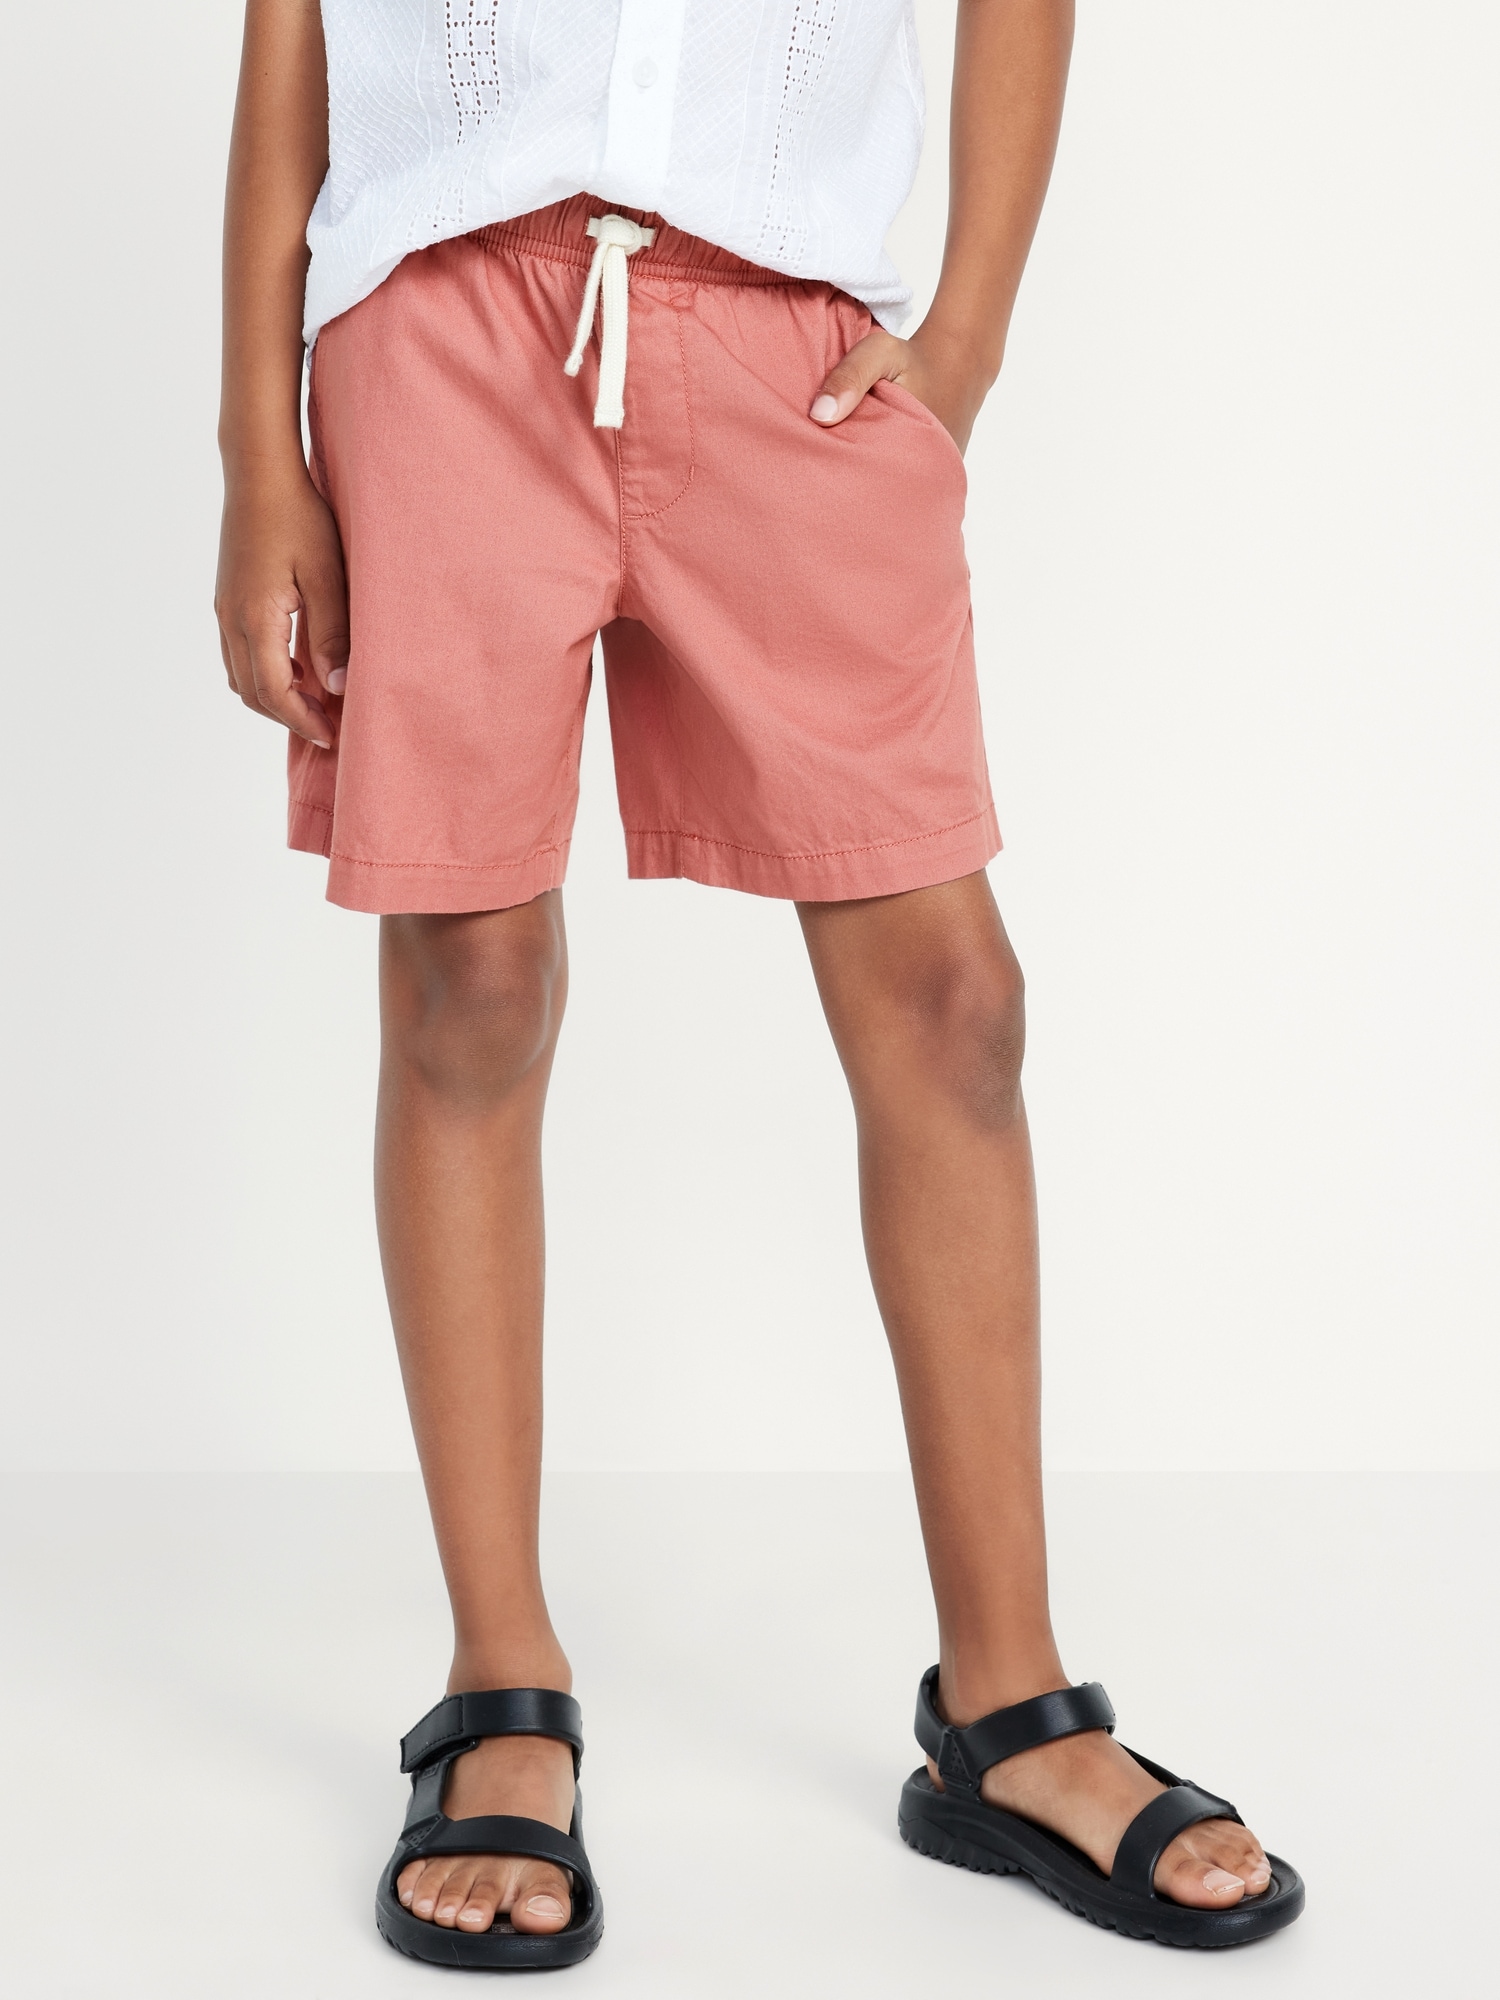 Above Knee Twill Non-Stretch Jogger Shorts for Boys